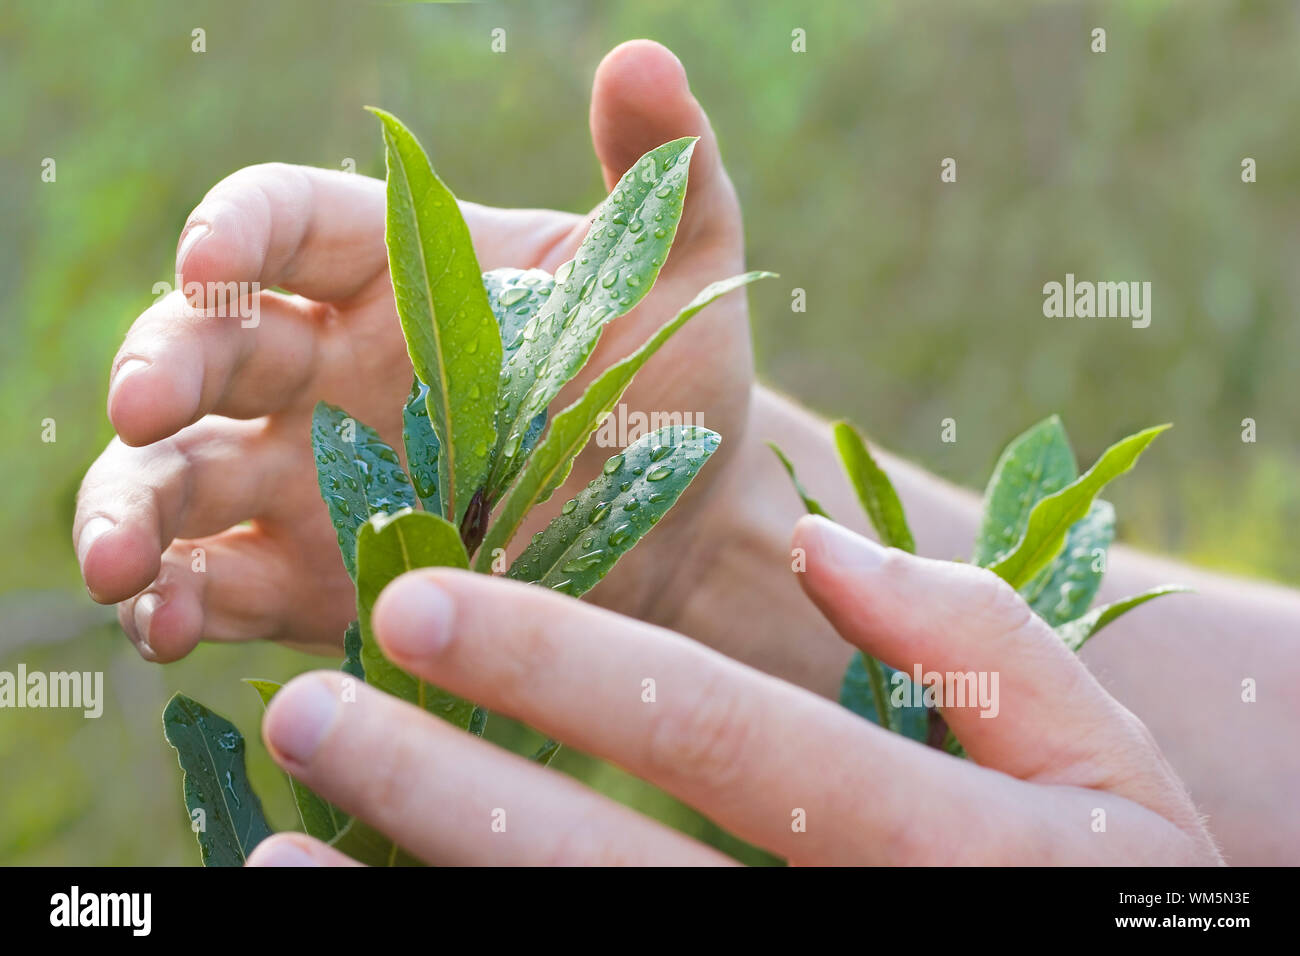 Male hands protecting a plant Stock Photo